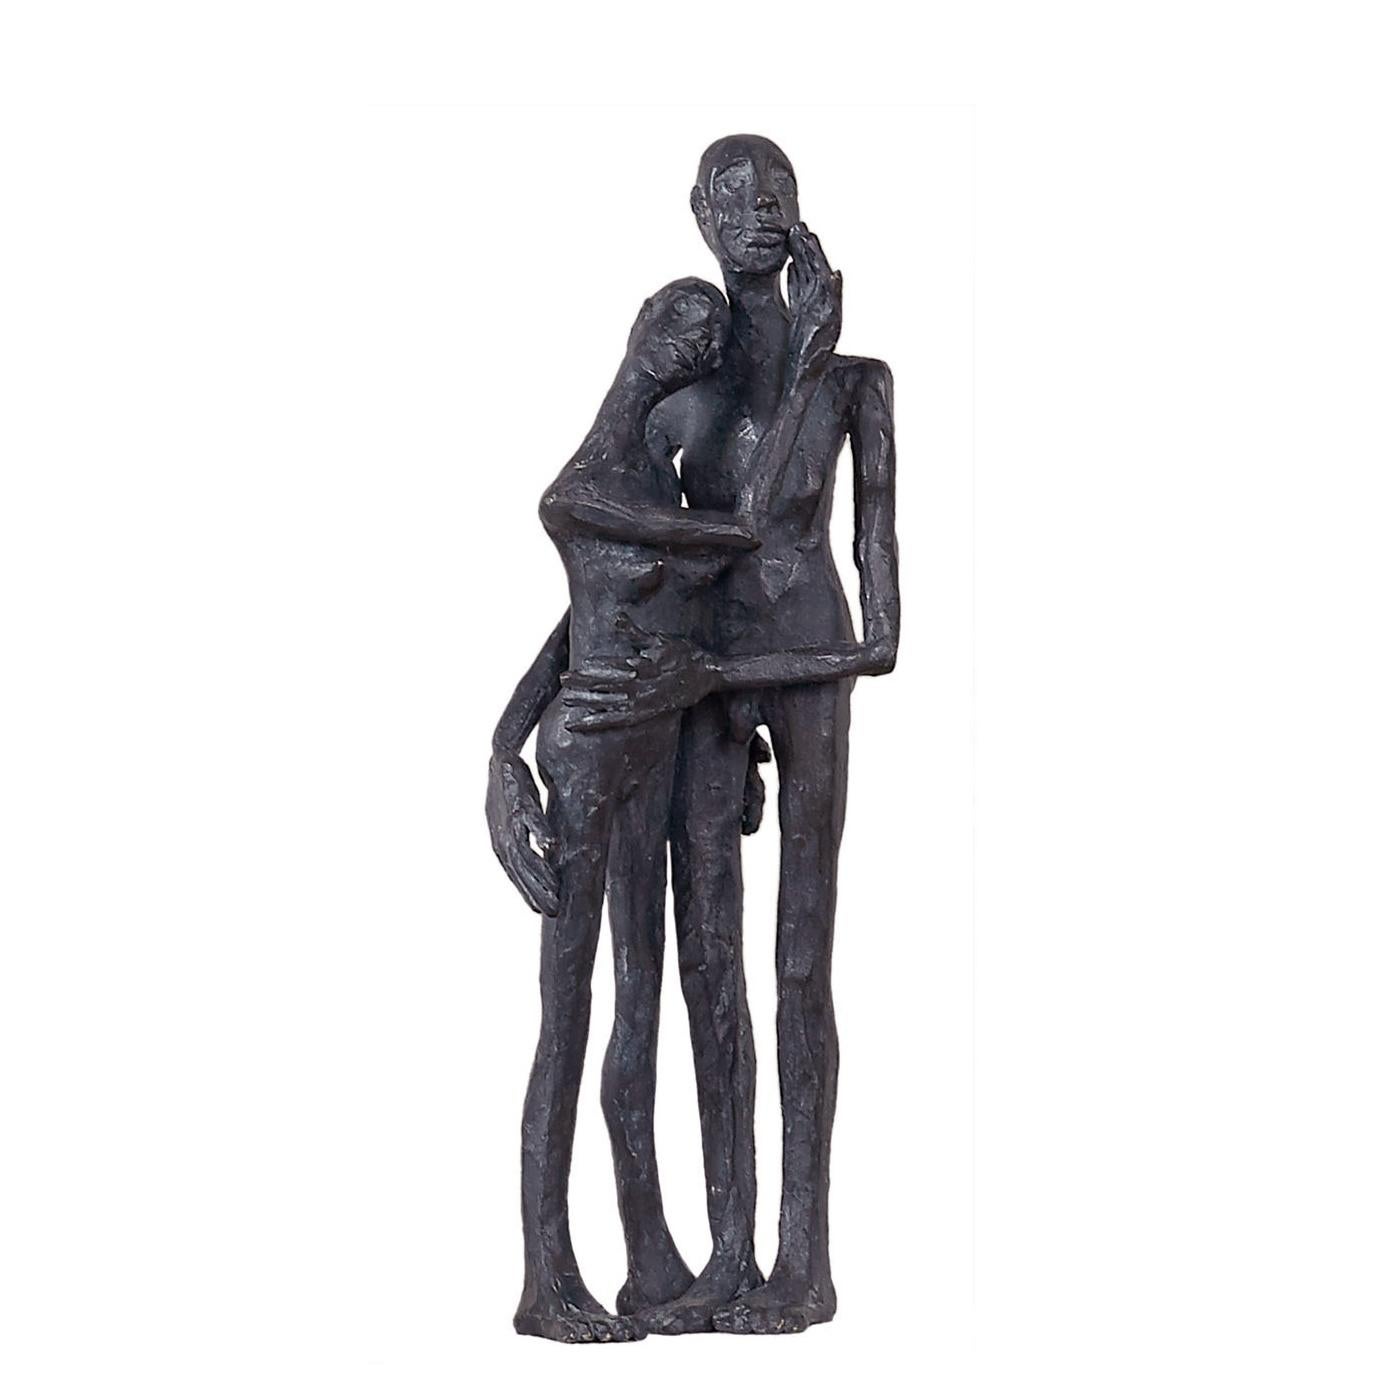 Sculpture feely bronze with all structure 
in casted and carved solid bronze in dark 
grey finish.